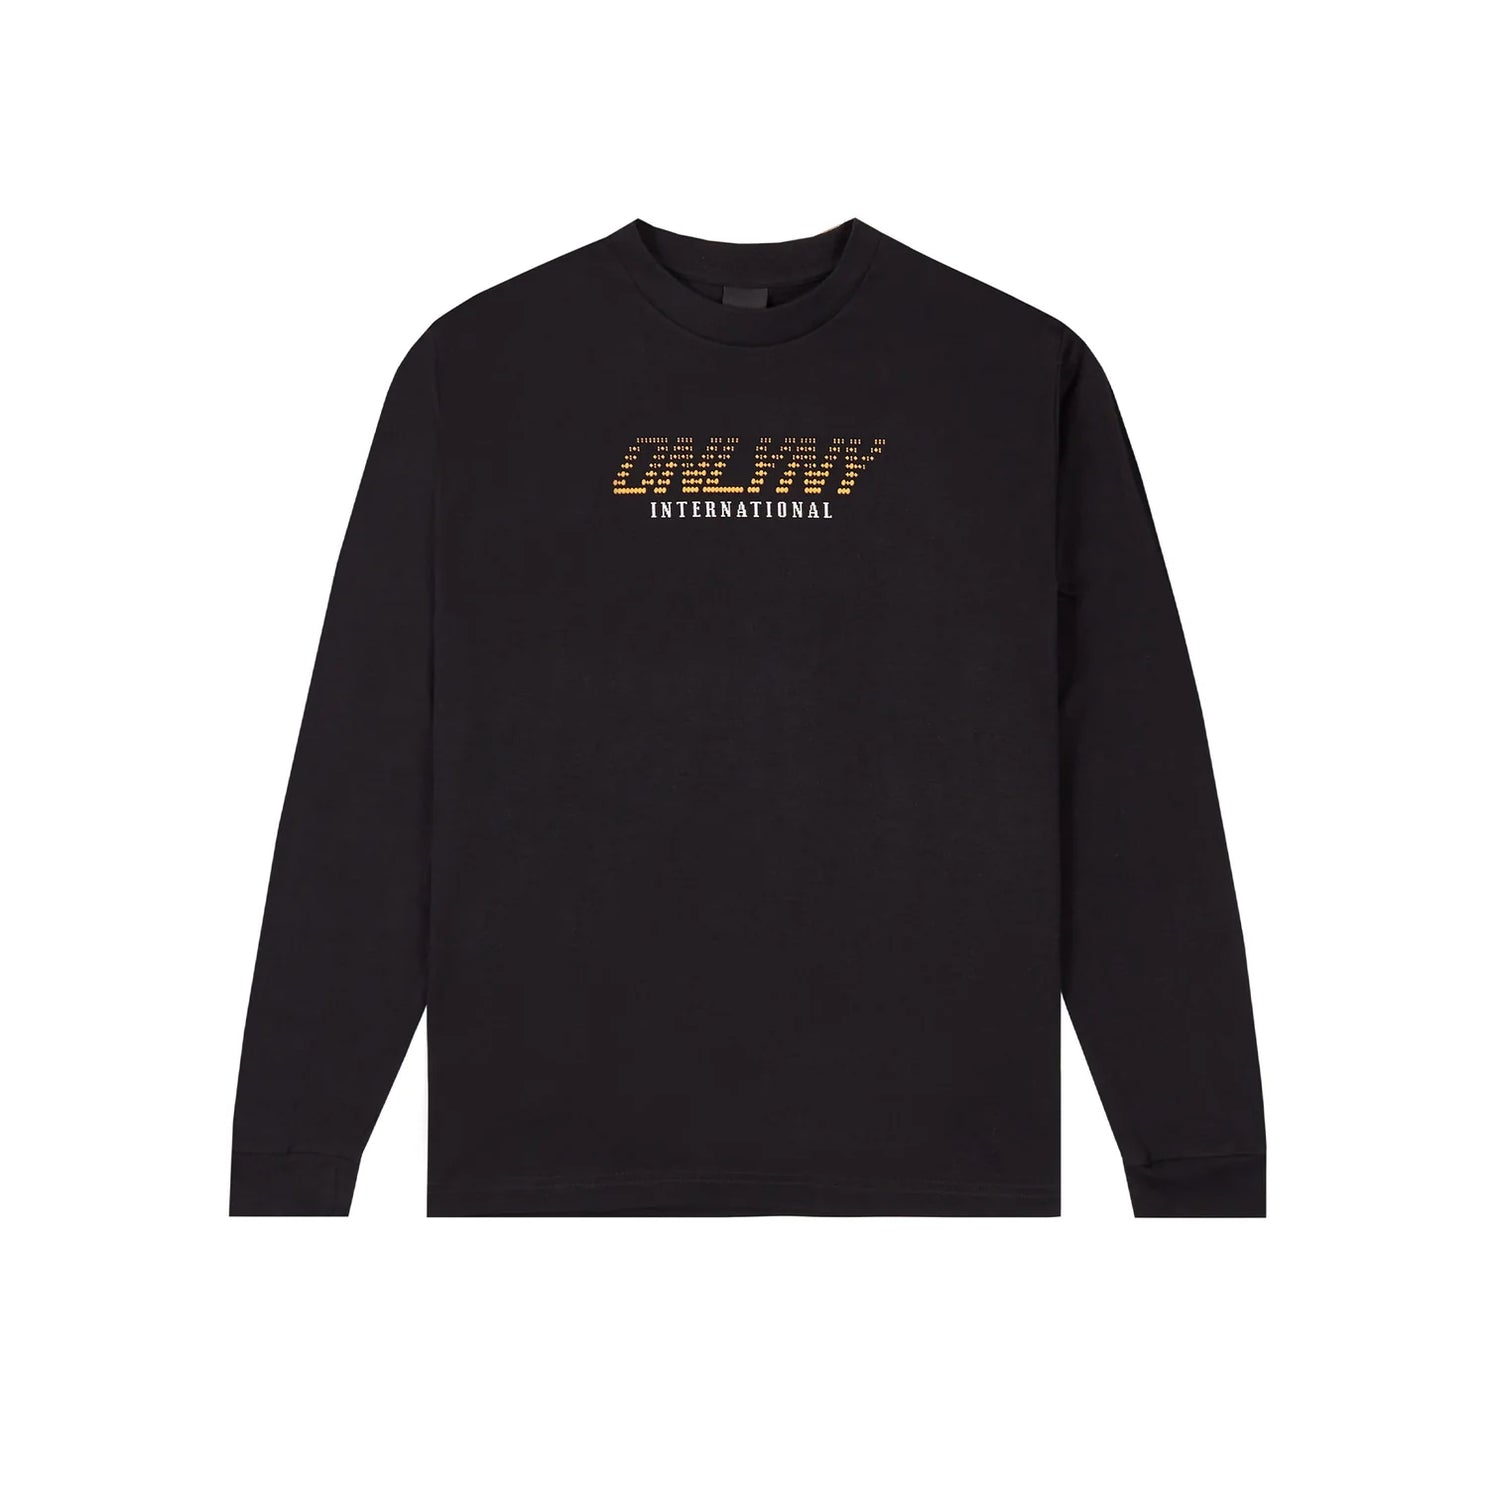 Only NY Earthbound Long Sleeve T-Shirt - Black